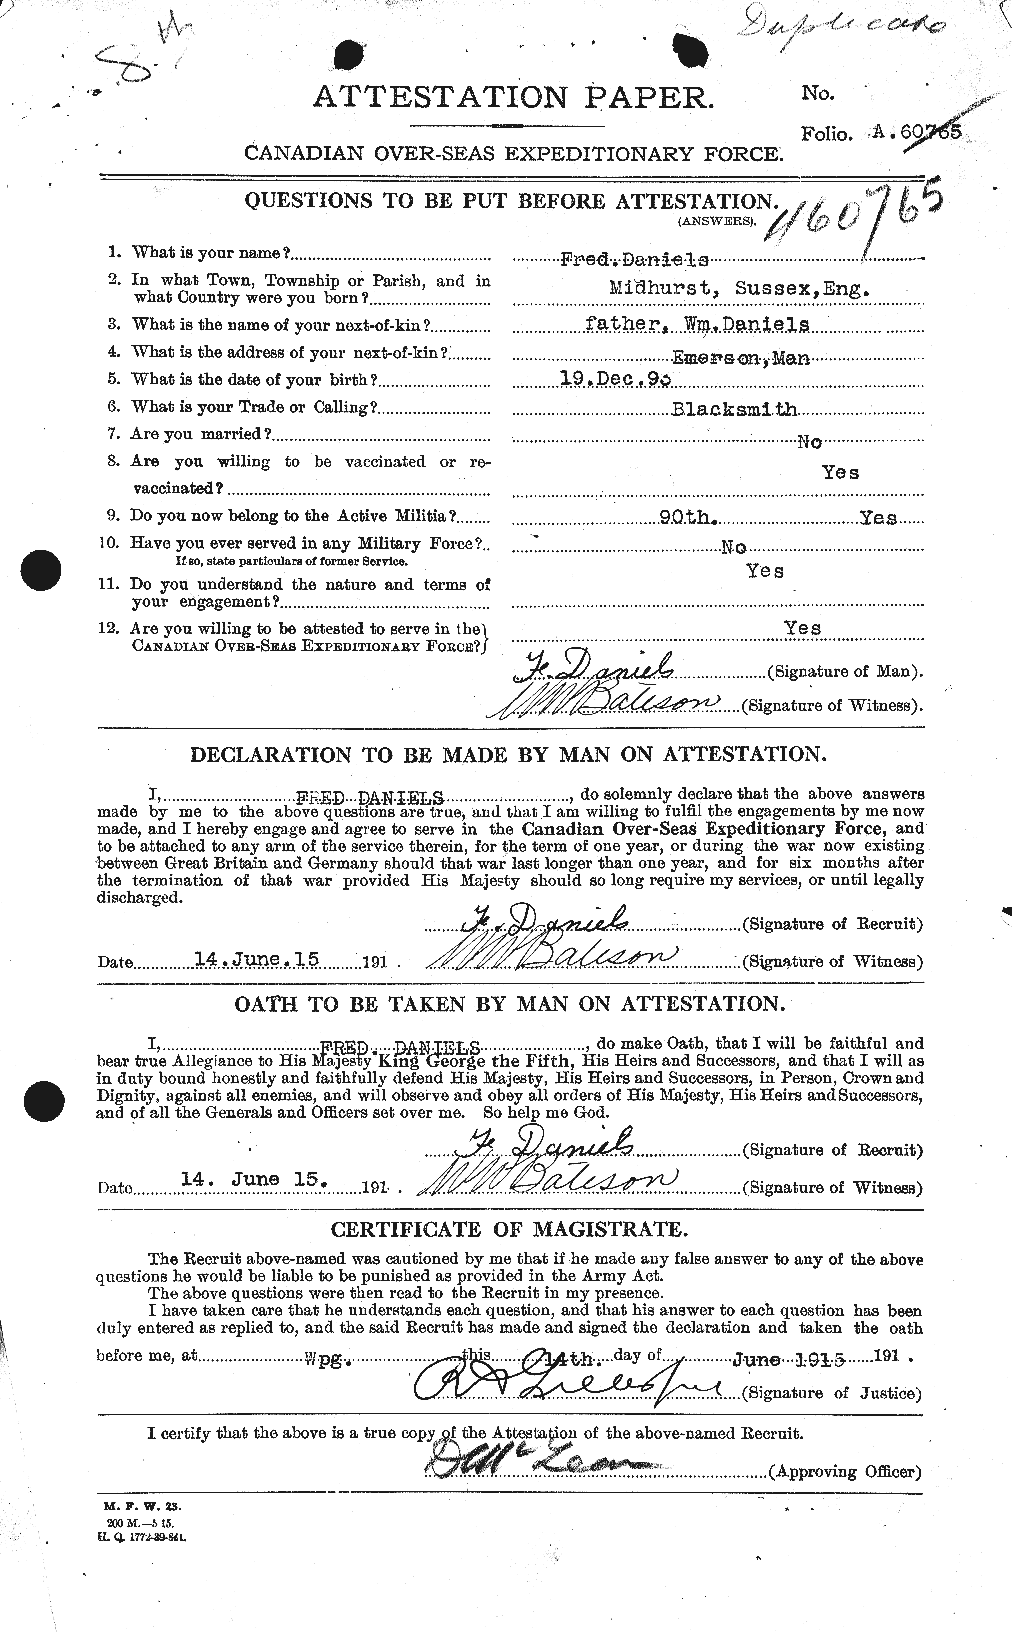 Personnel Records of the First World War - CEF 279593a